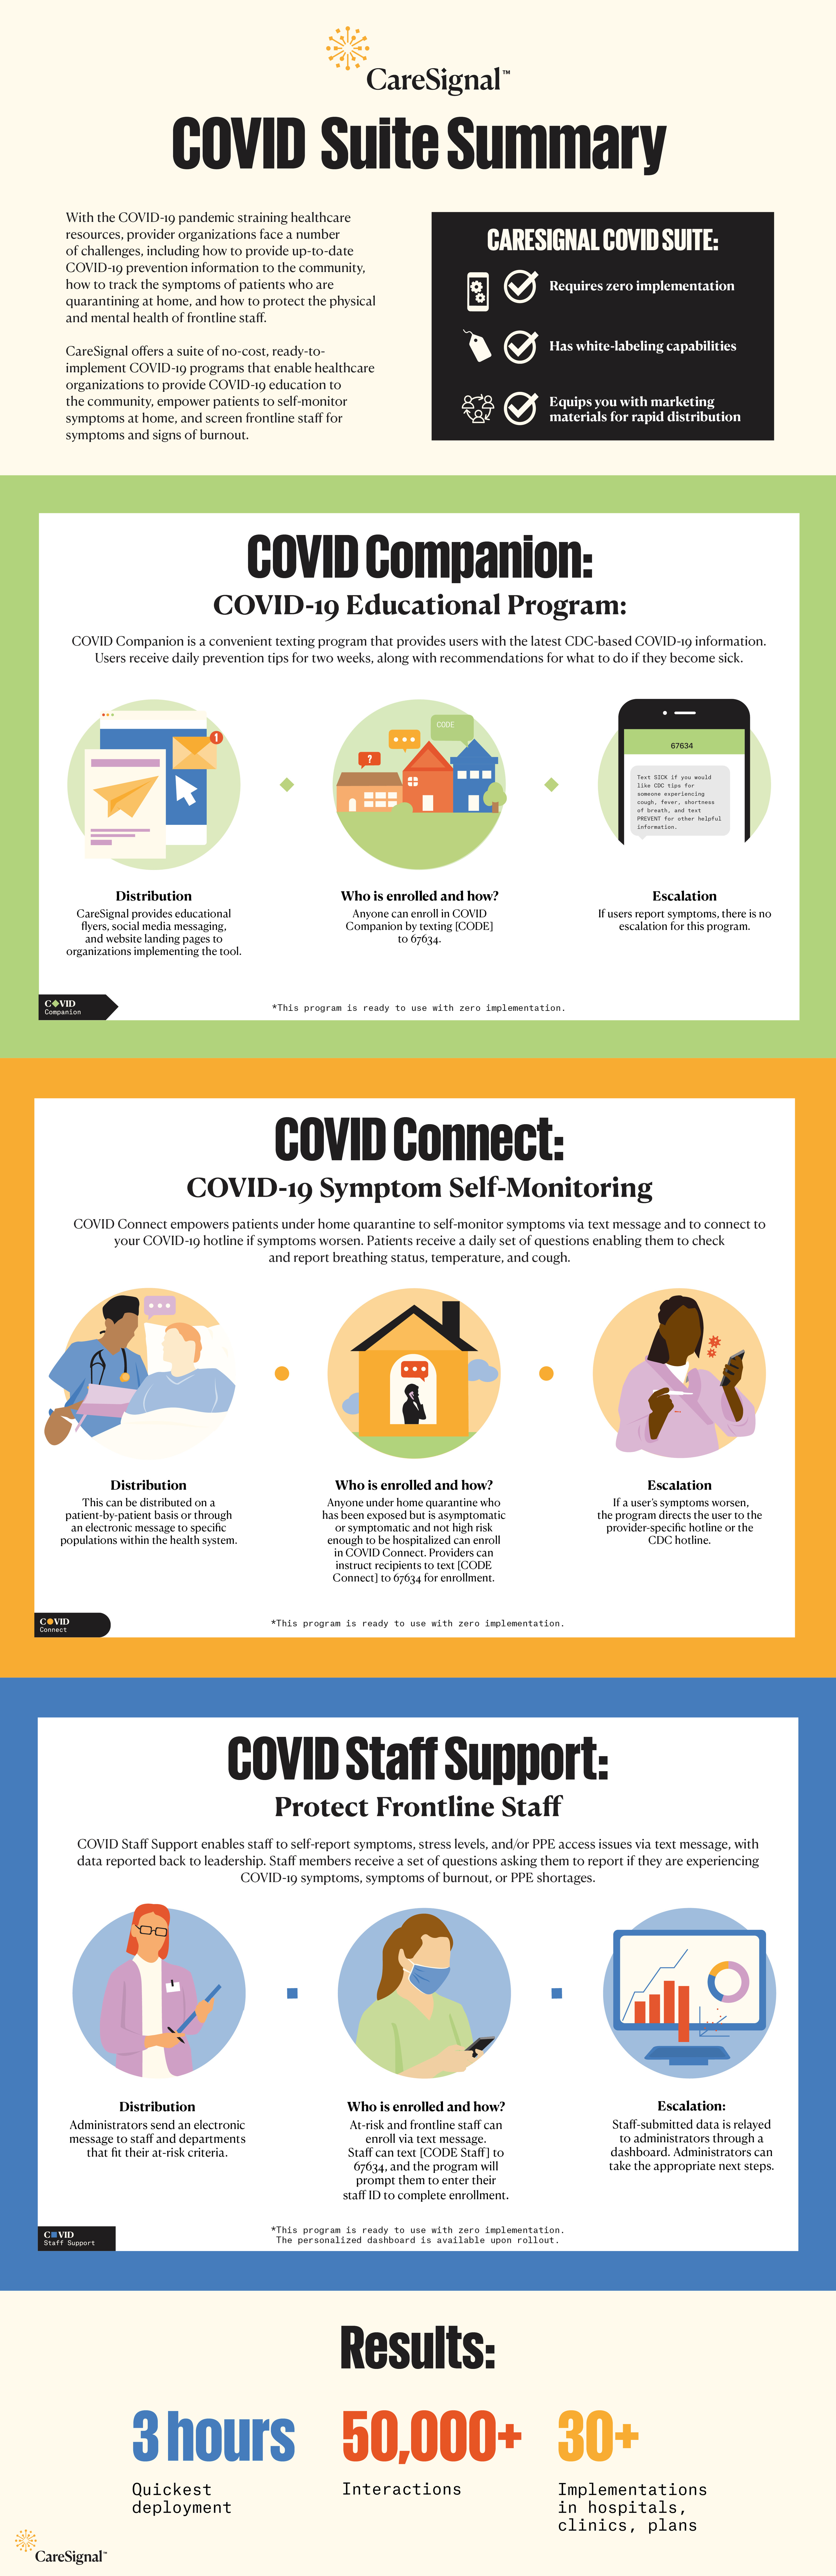 CareSignal.COVID-Suite-Summary.INFOGRAPHIC.FINAL